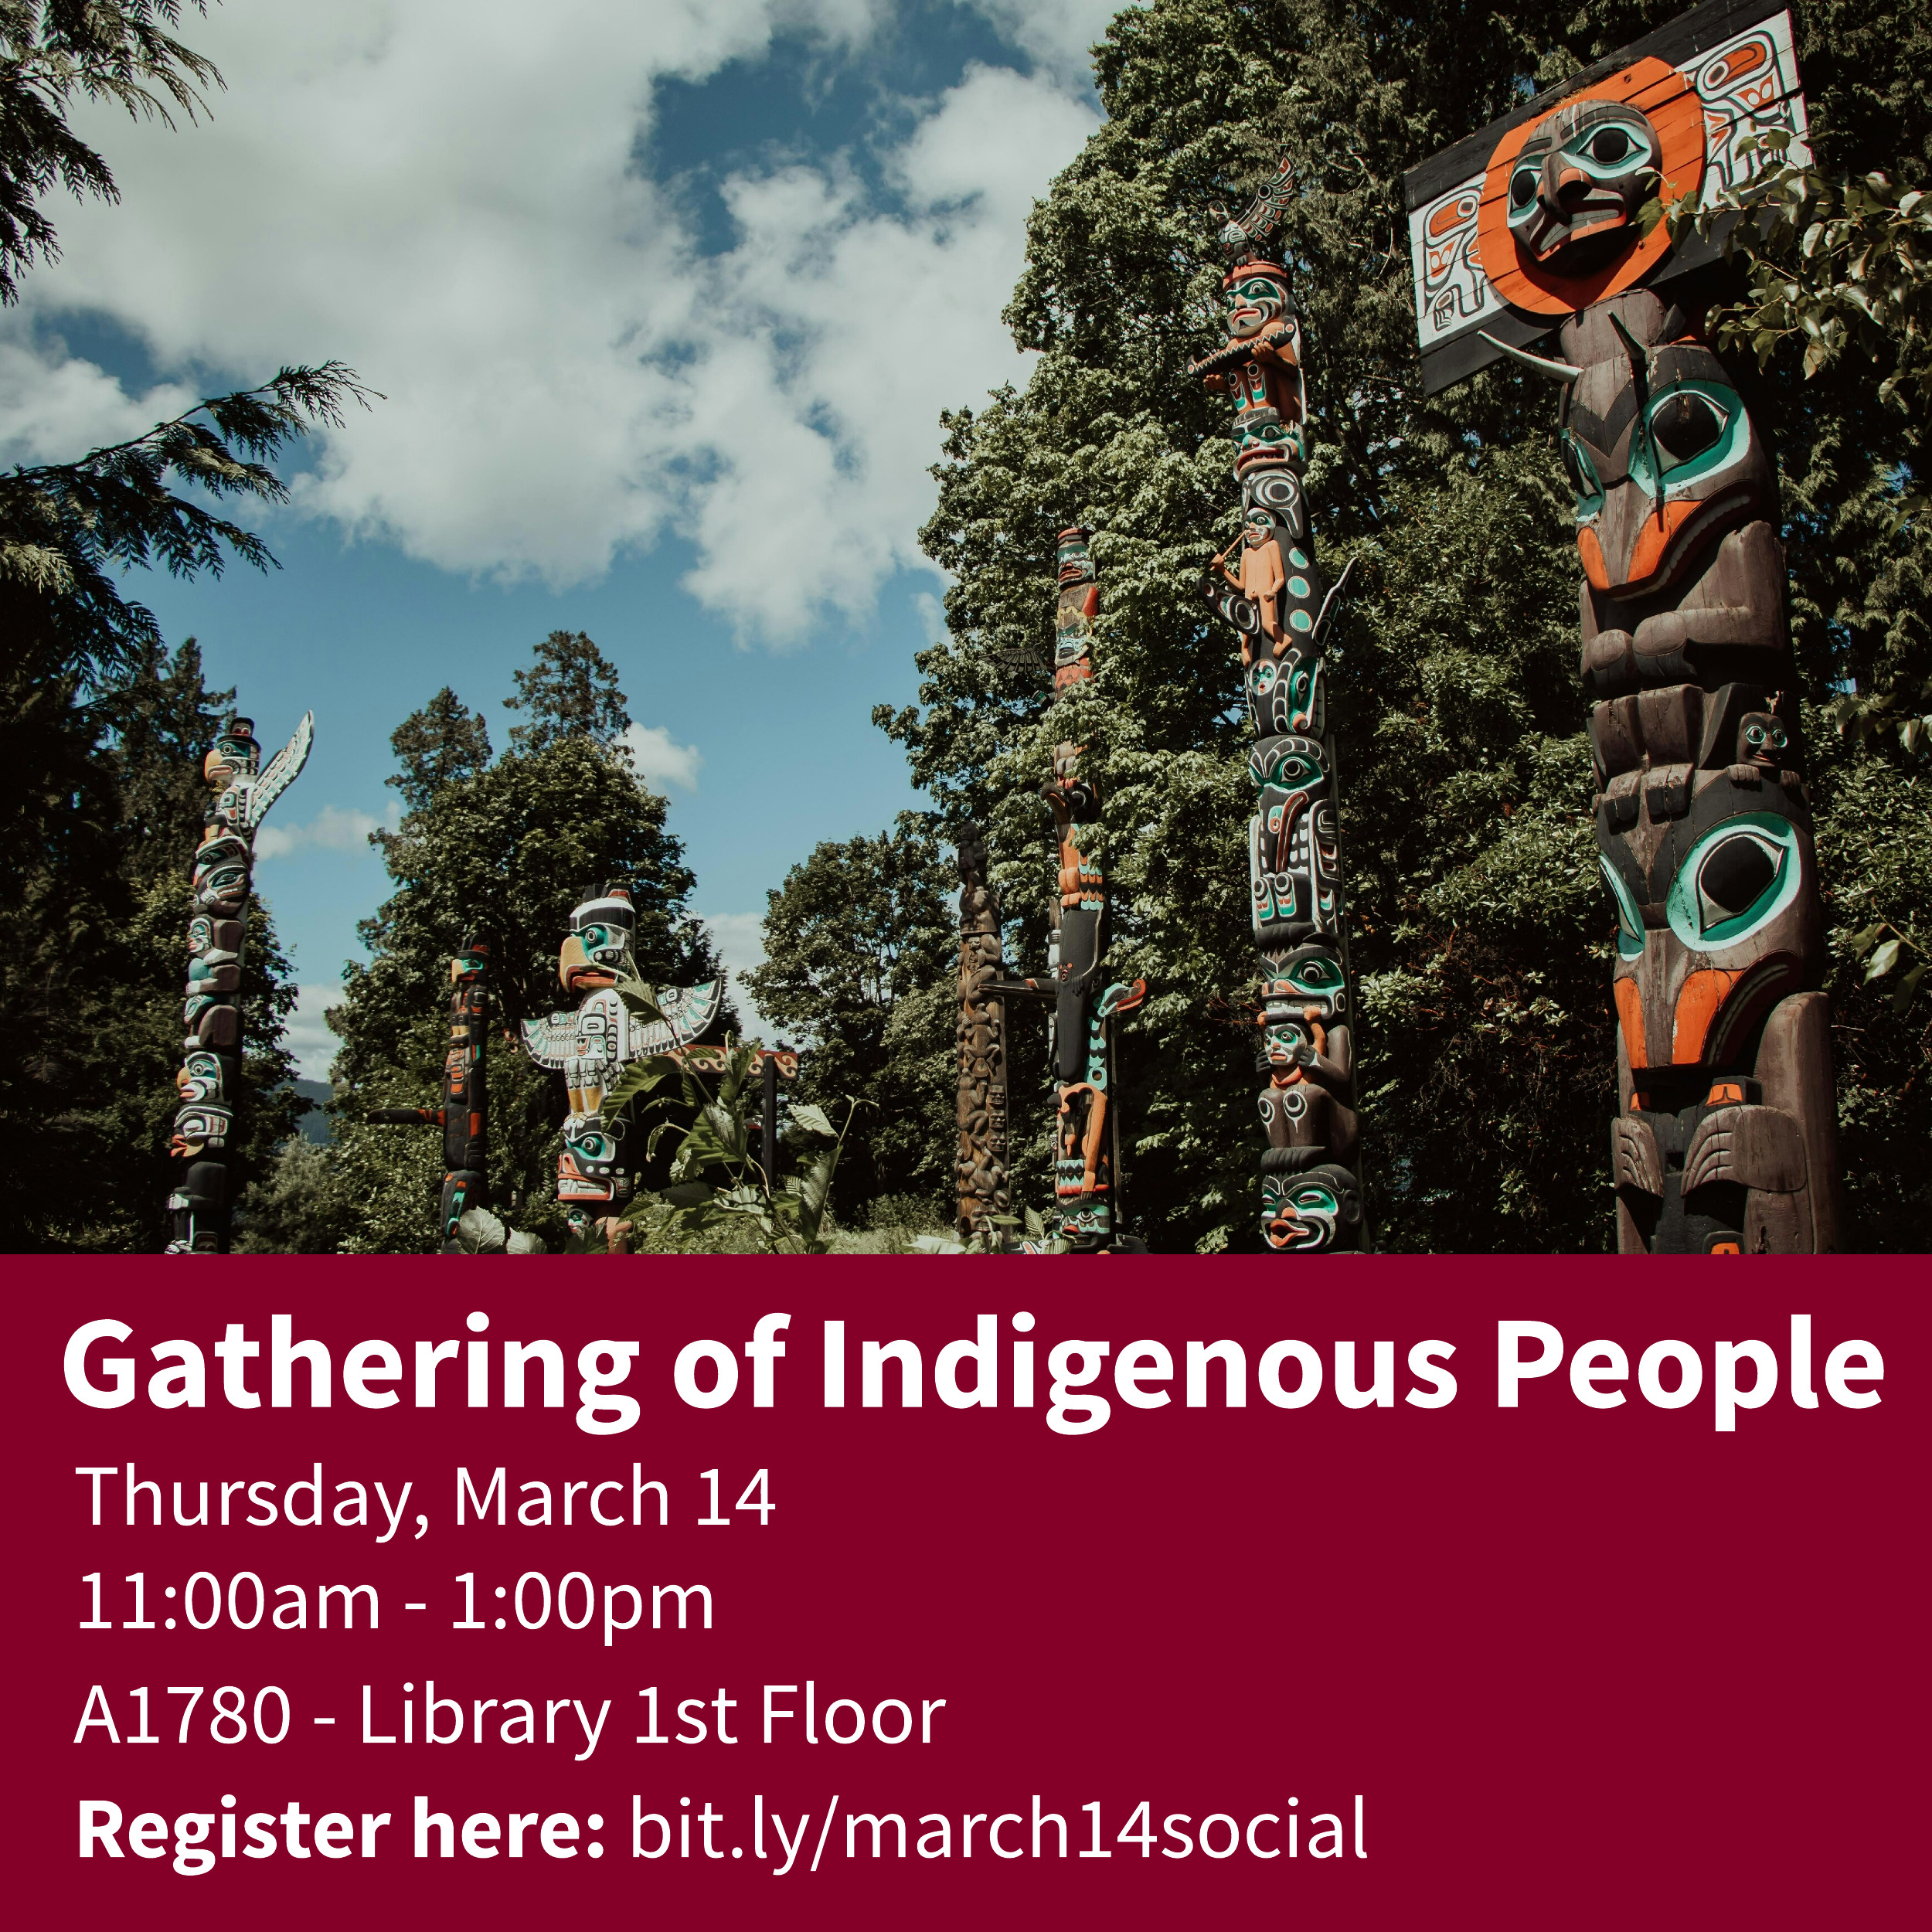 Gathering of Indigenous People. Thursday, March 14, 11:00am–1:00pm. A1780, Library 1st Floor. Register her: bit.ly/march14social